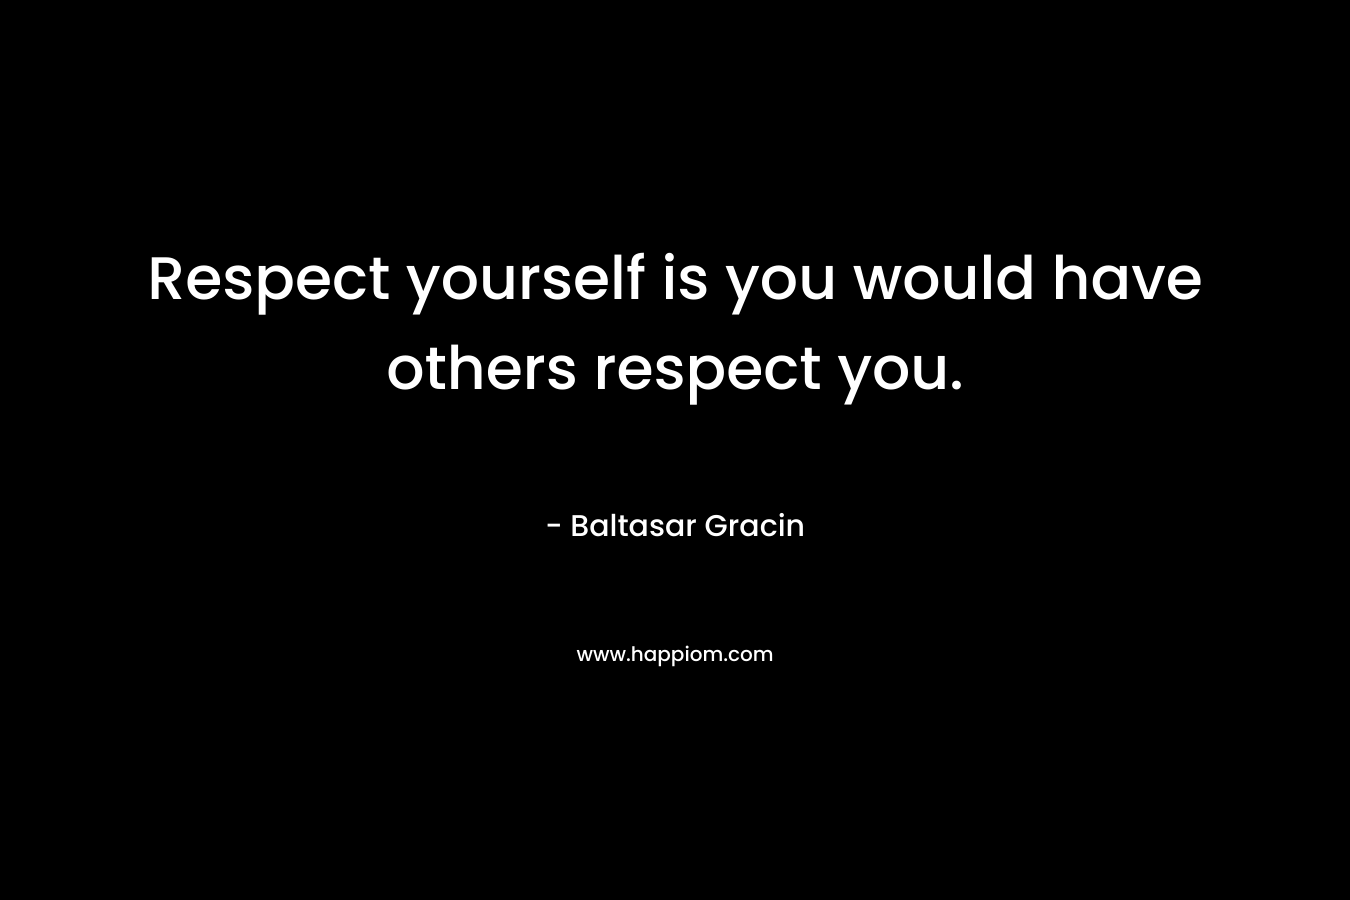 Respect yourself is you would have others respect you. – Baltasar Gracin